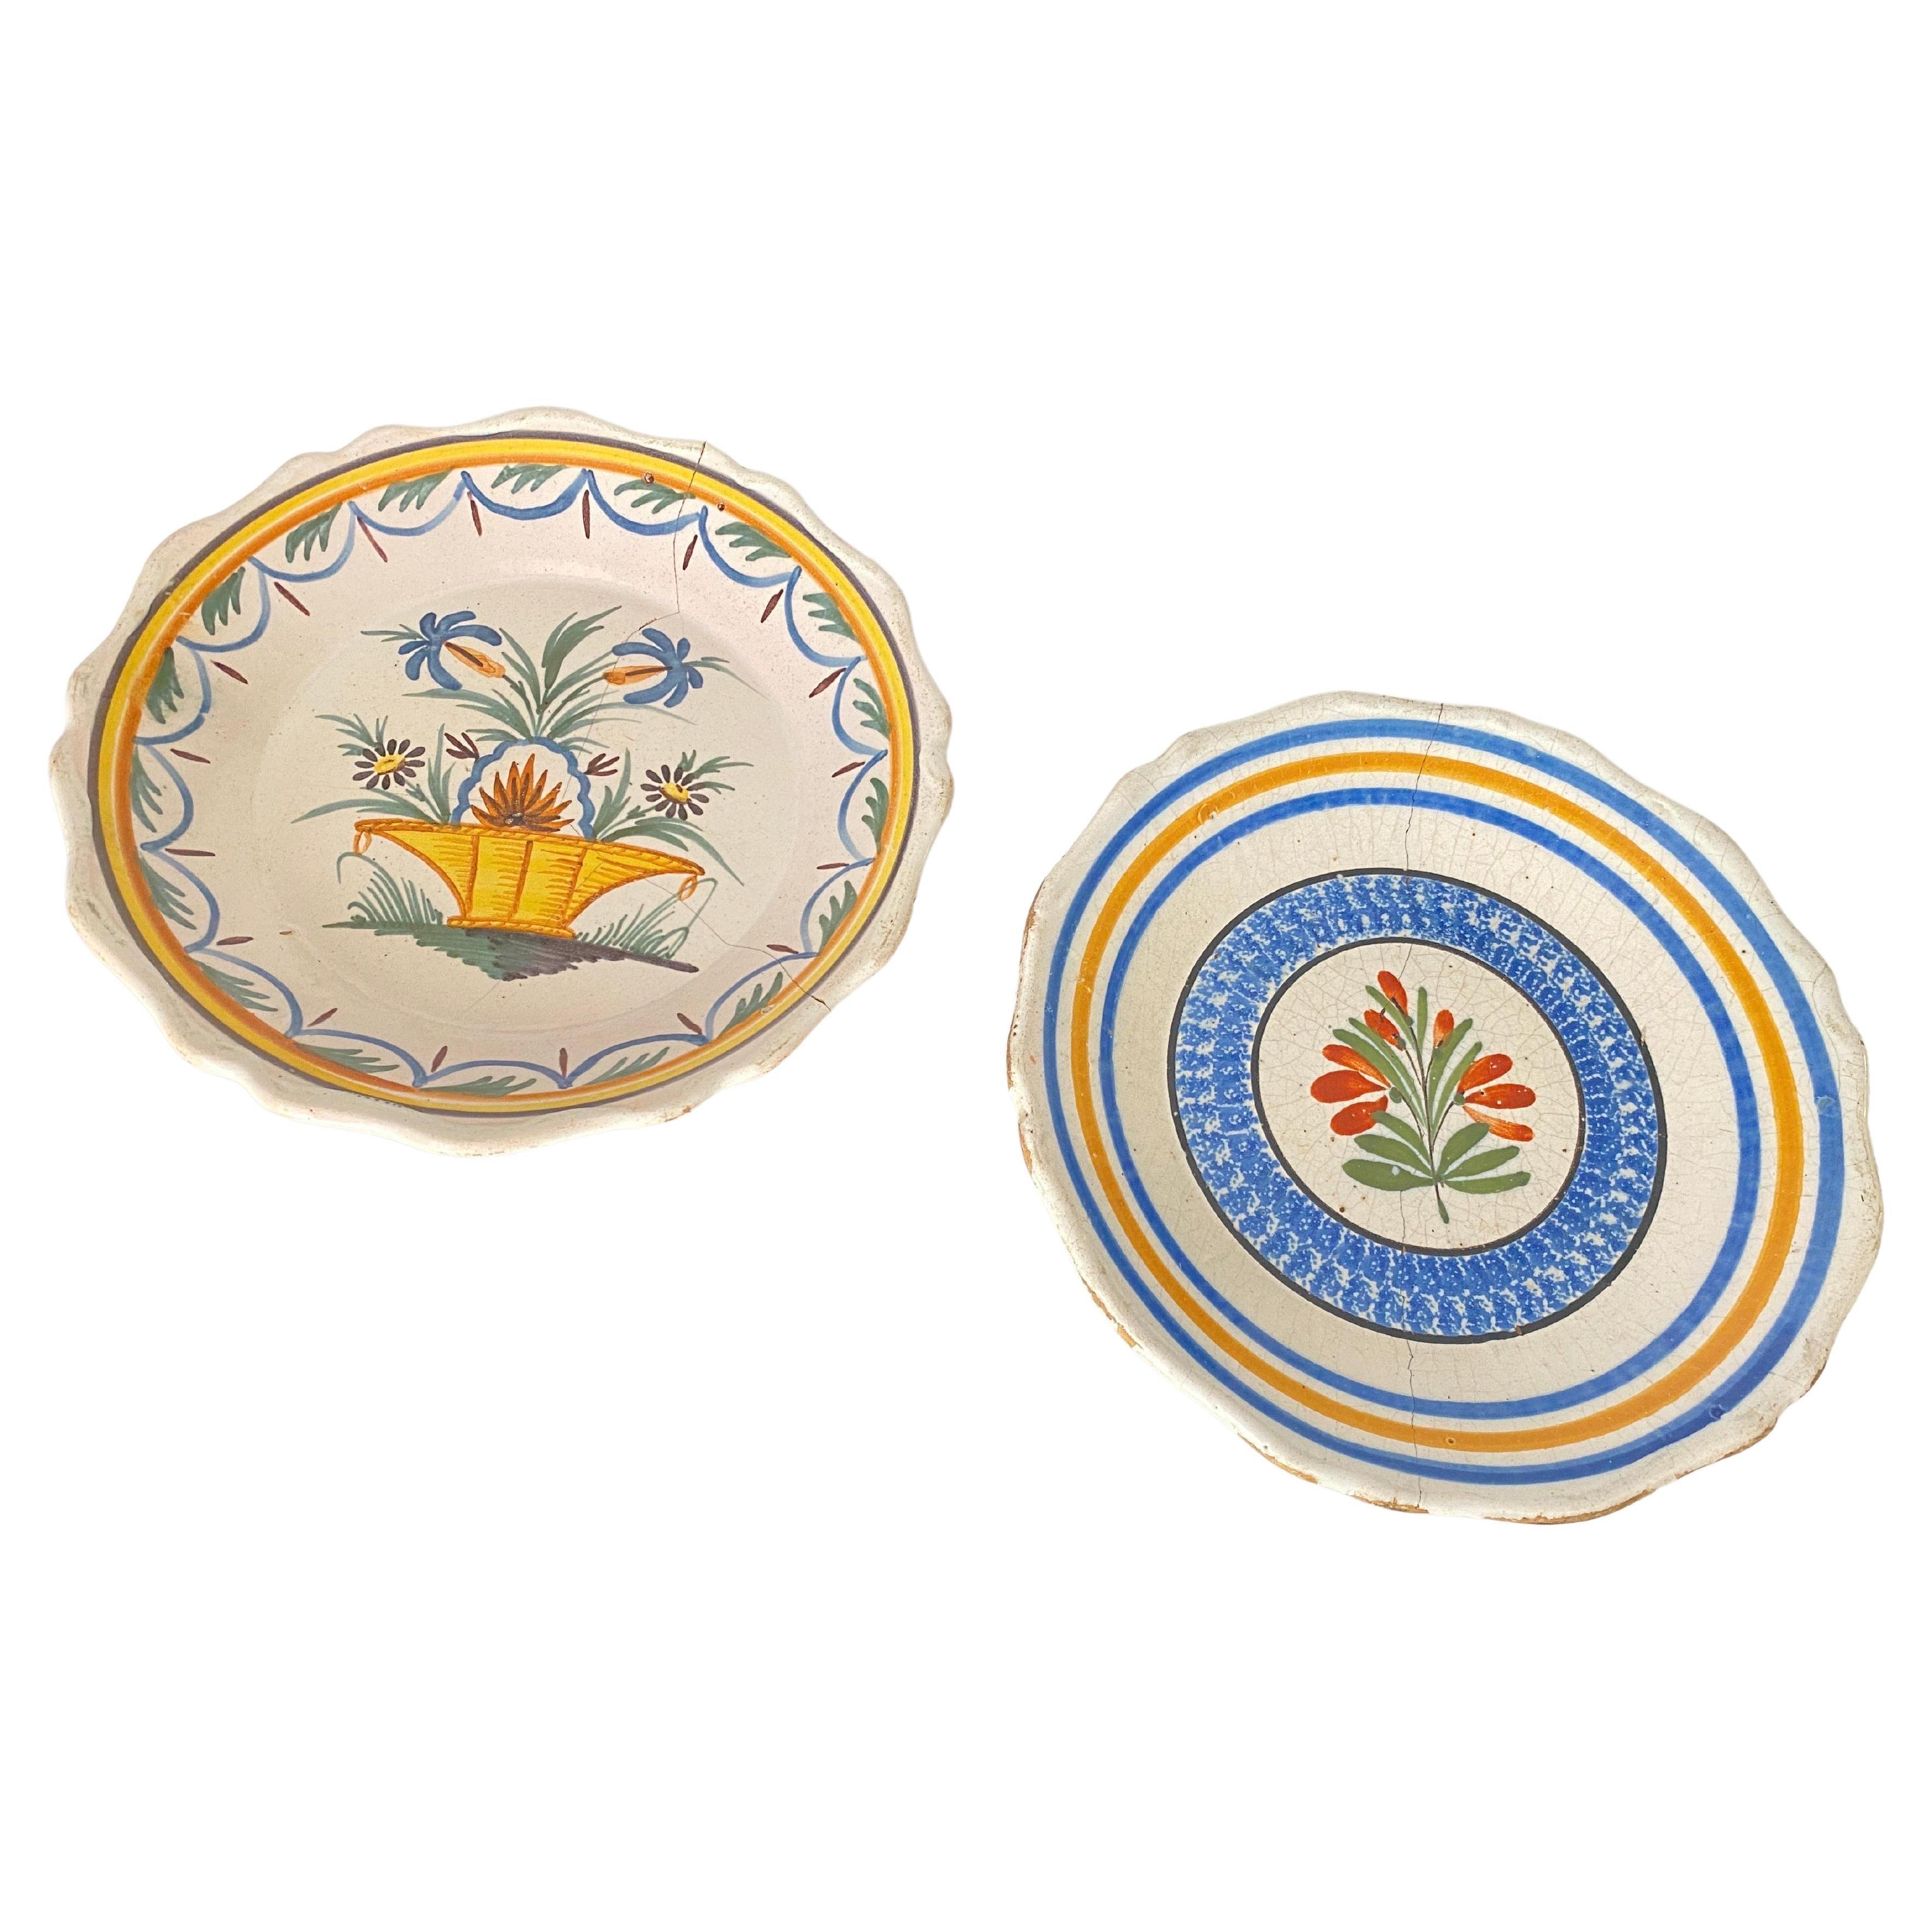 Plates in French Faïence Yellow and Blue Color 19th-18th Century Set of 2